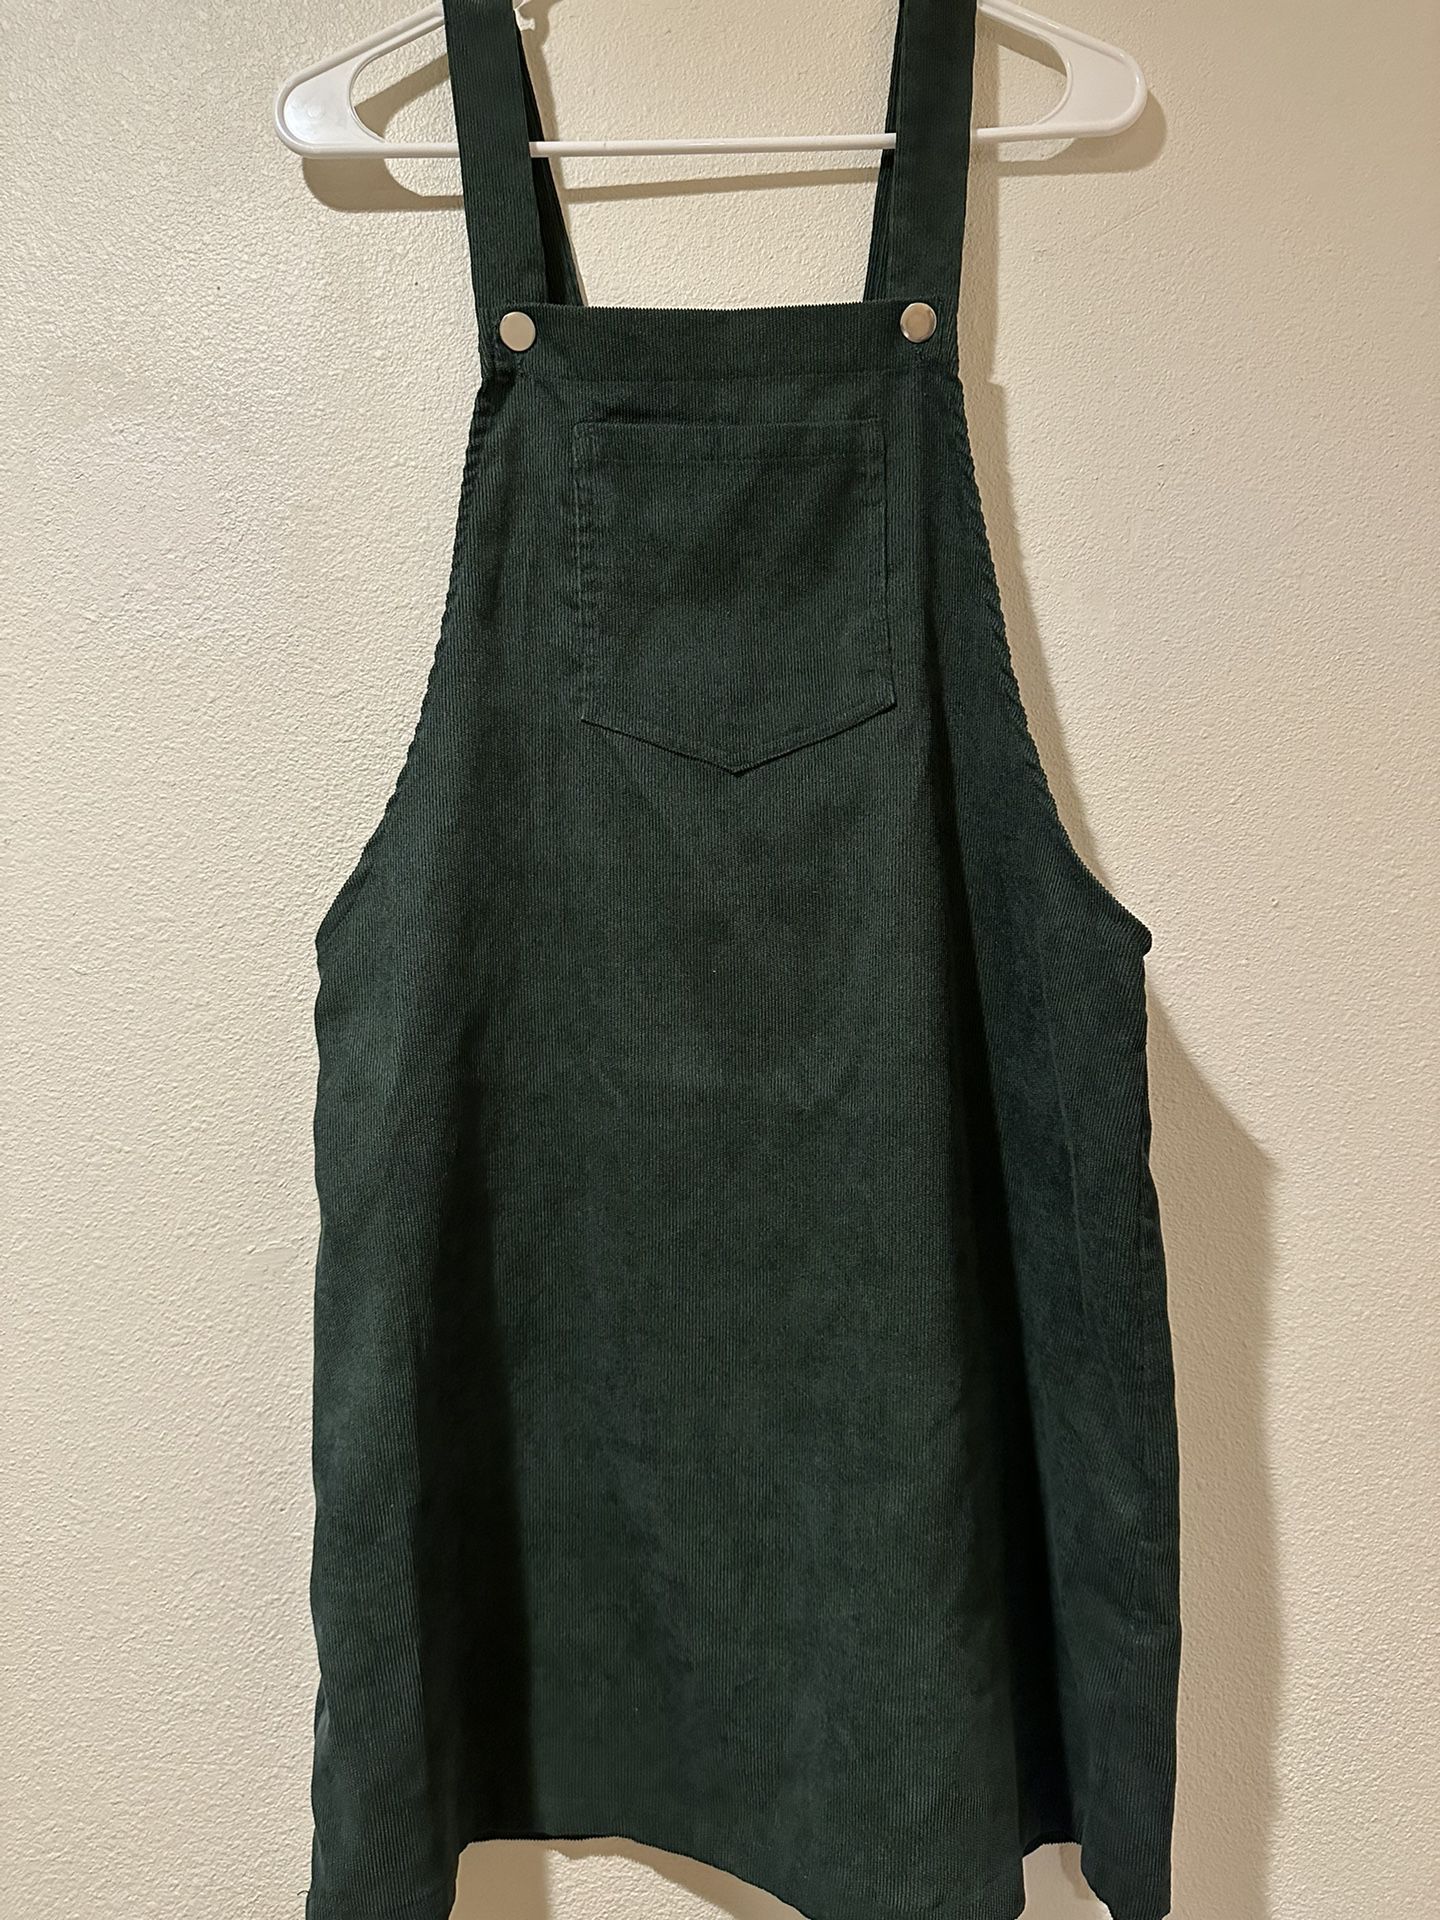 Ladies Corduroy Forest Green Overall Dress Size L